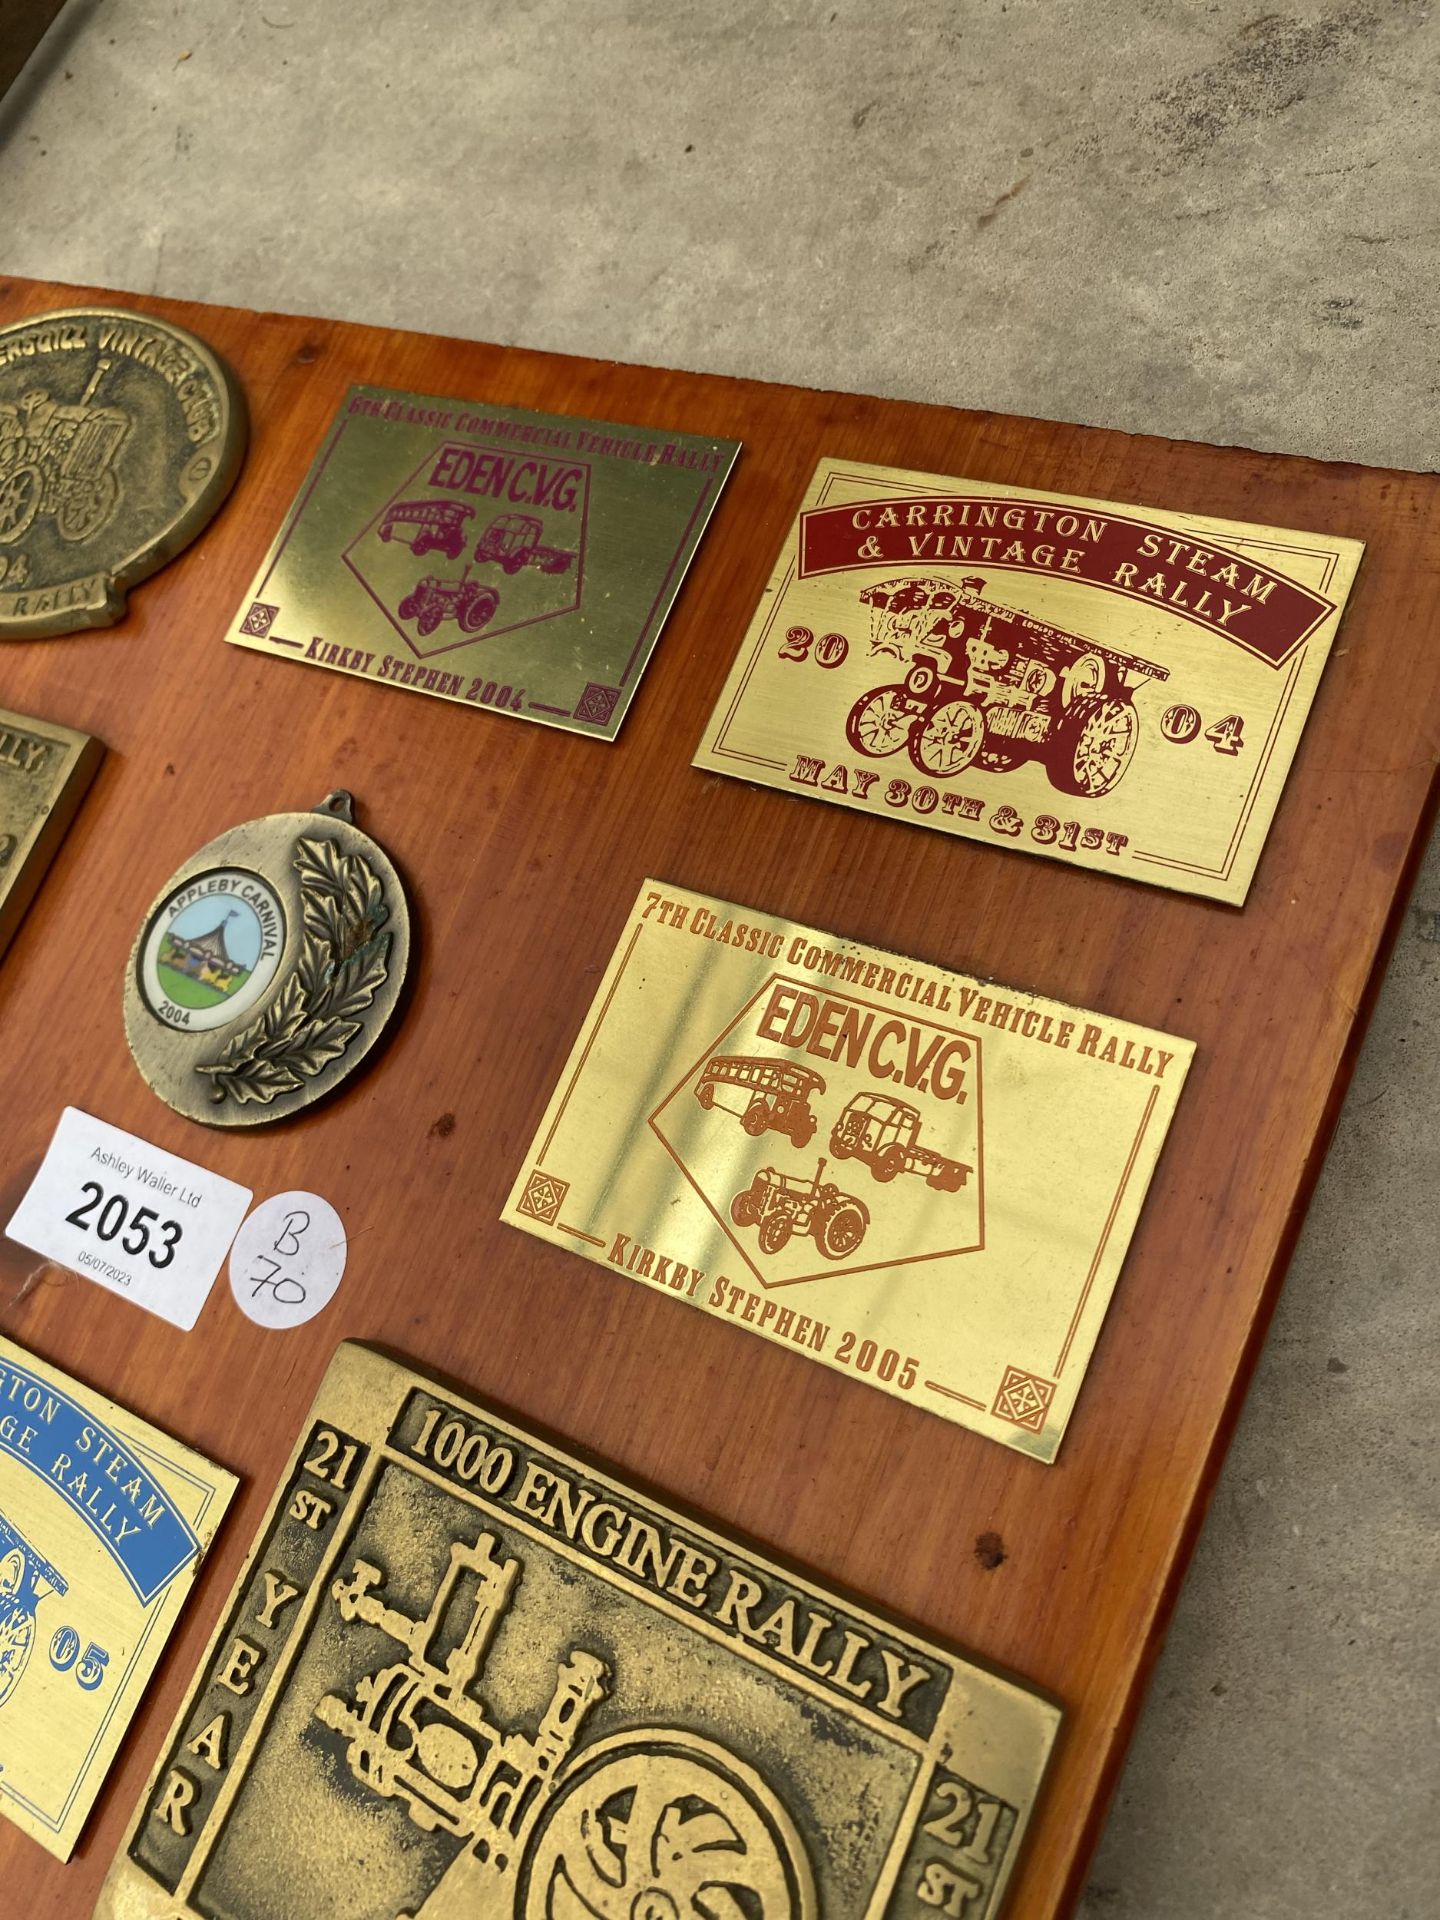 A WOODEN PLAQUE WITH VARIOUS BRASS STEAM RALLY PLAQUES ATTATCHED - Image 3 of 4